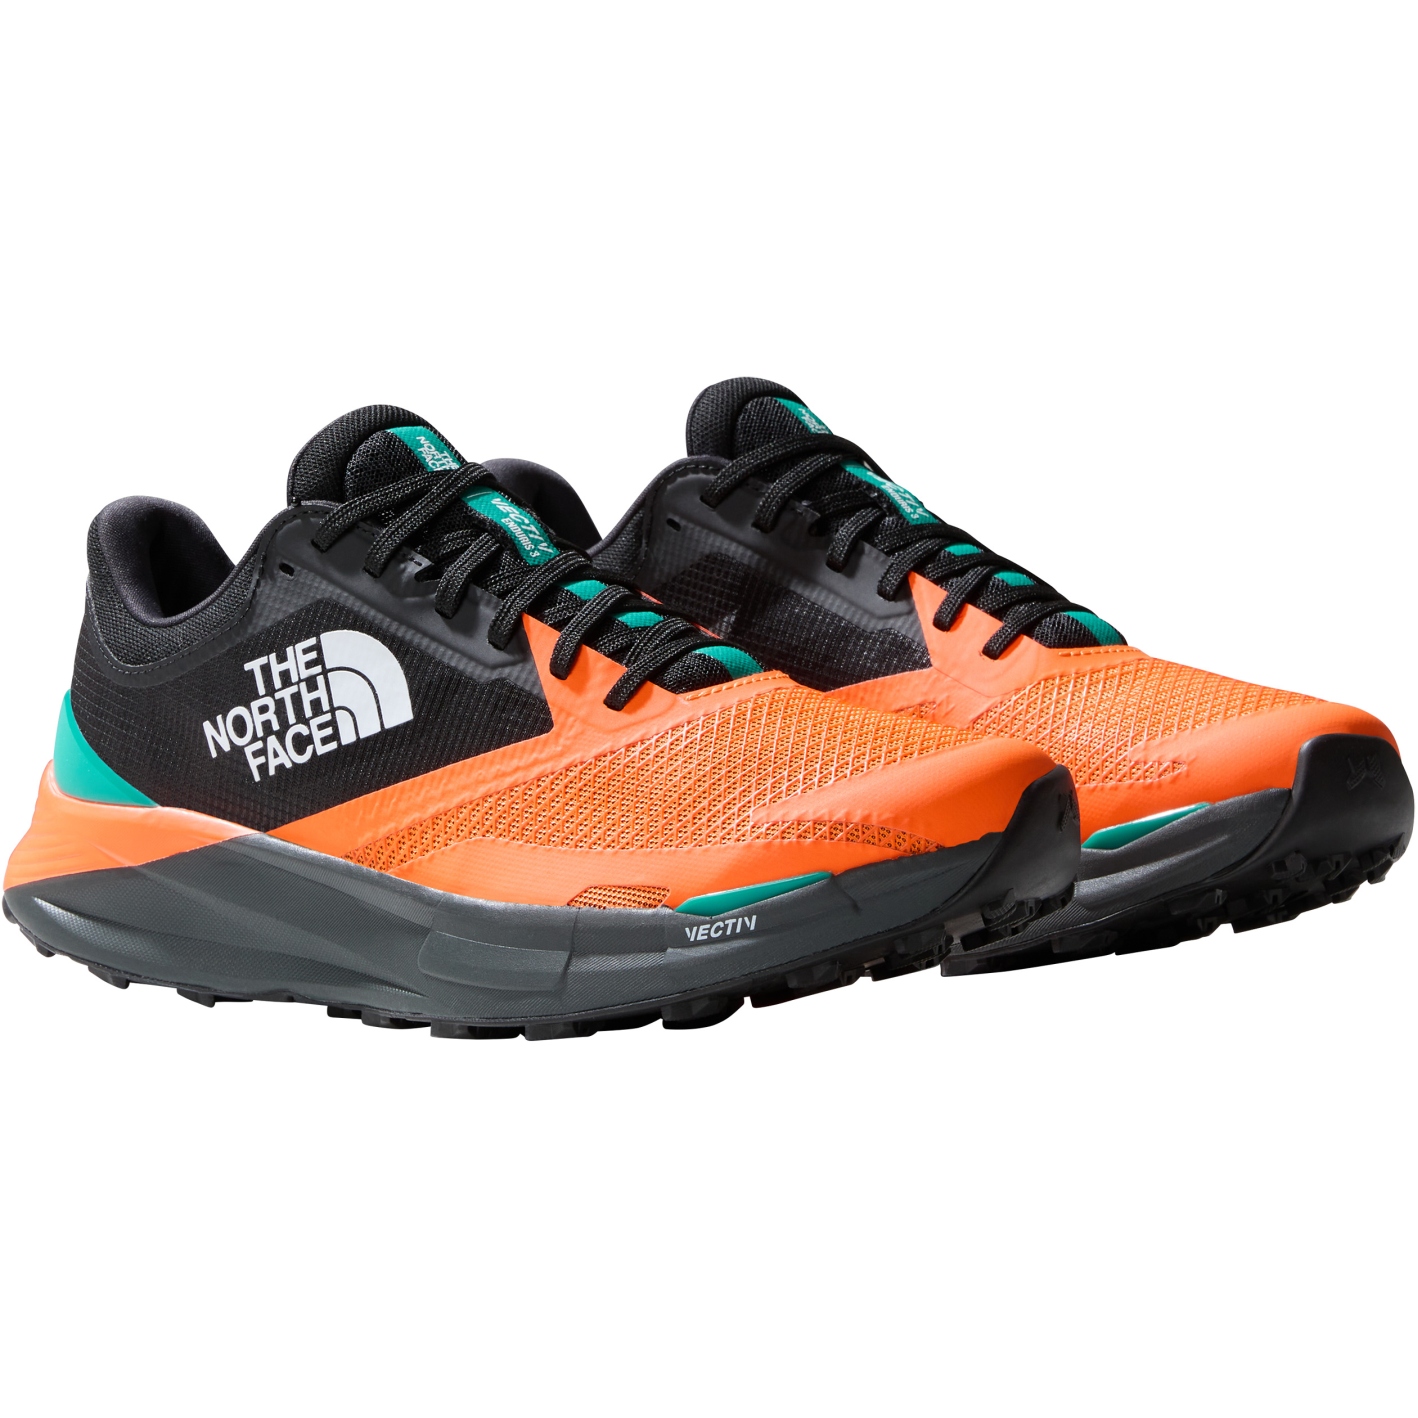 Picture of The North Face VECTIV™ Enduris III Trail Running Shoes Men - Power Orange/TNF Black